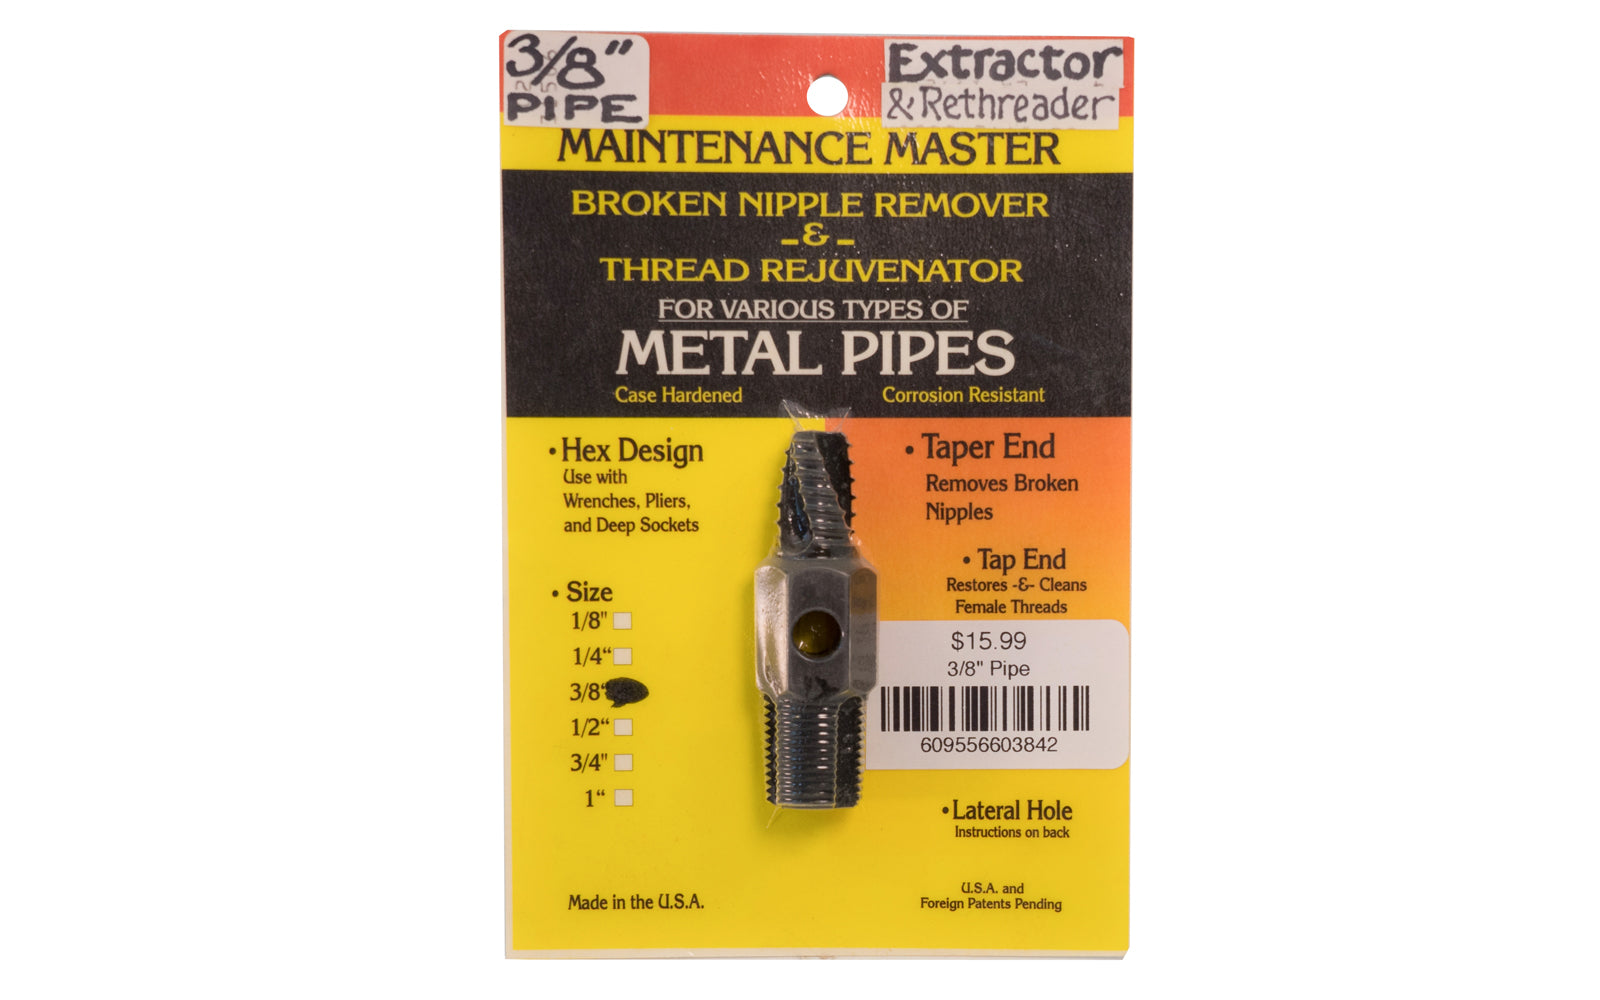 Broken Nipple Remover & Thread Rejuvenator - 3/8" Pipe. Hex design: Use with wrenches, pliers, & deep sockets. Taper End: Removes broken nipples. Tap End:  Restores & cleans female threads.   Made in USA.